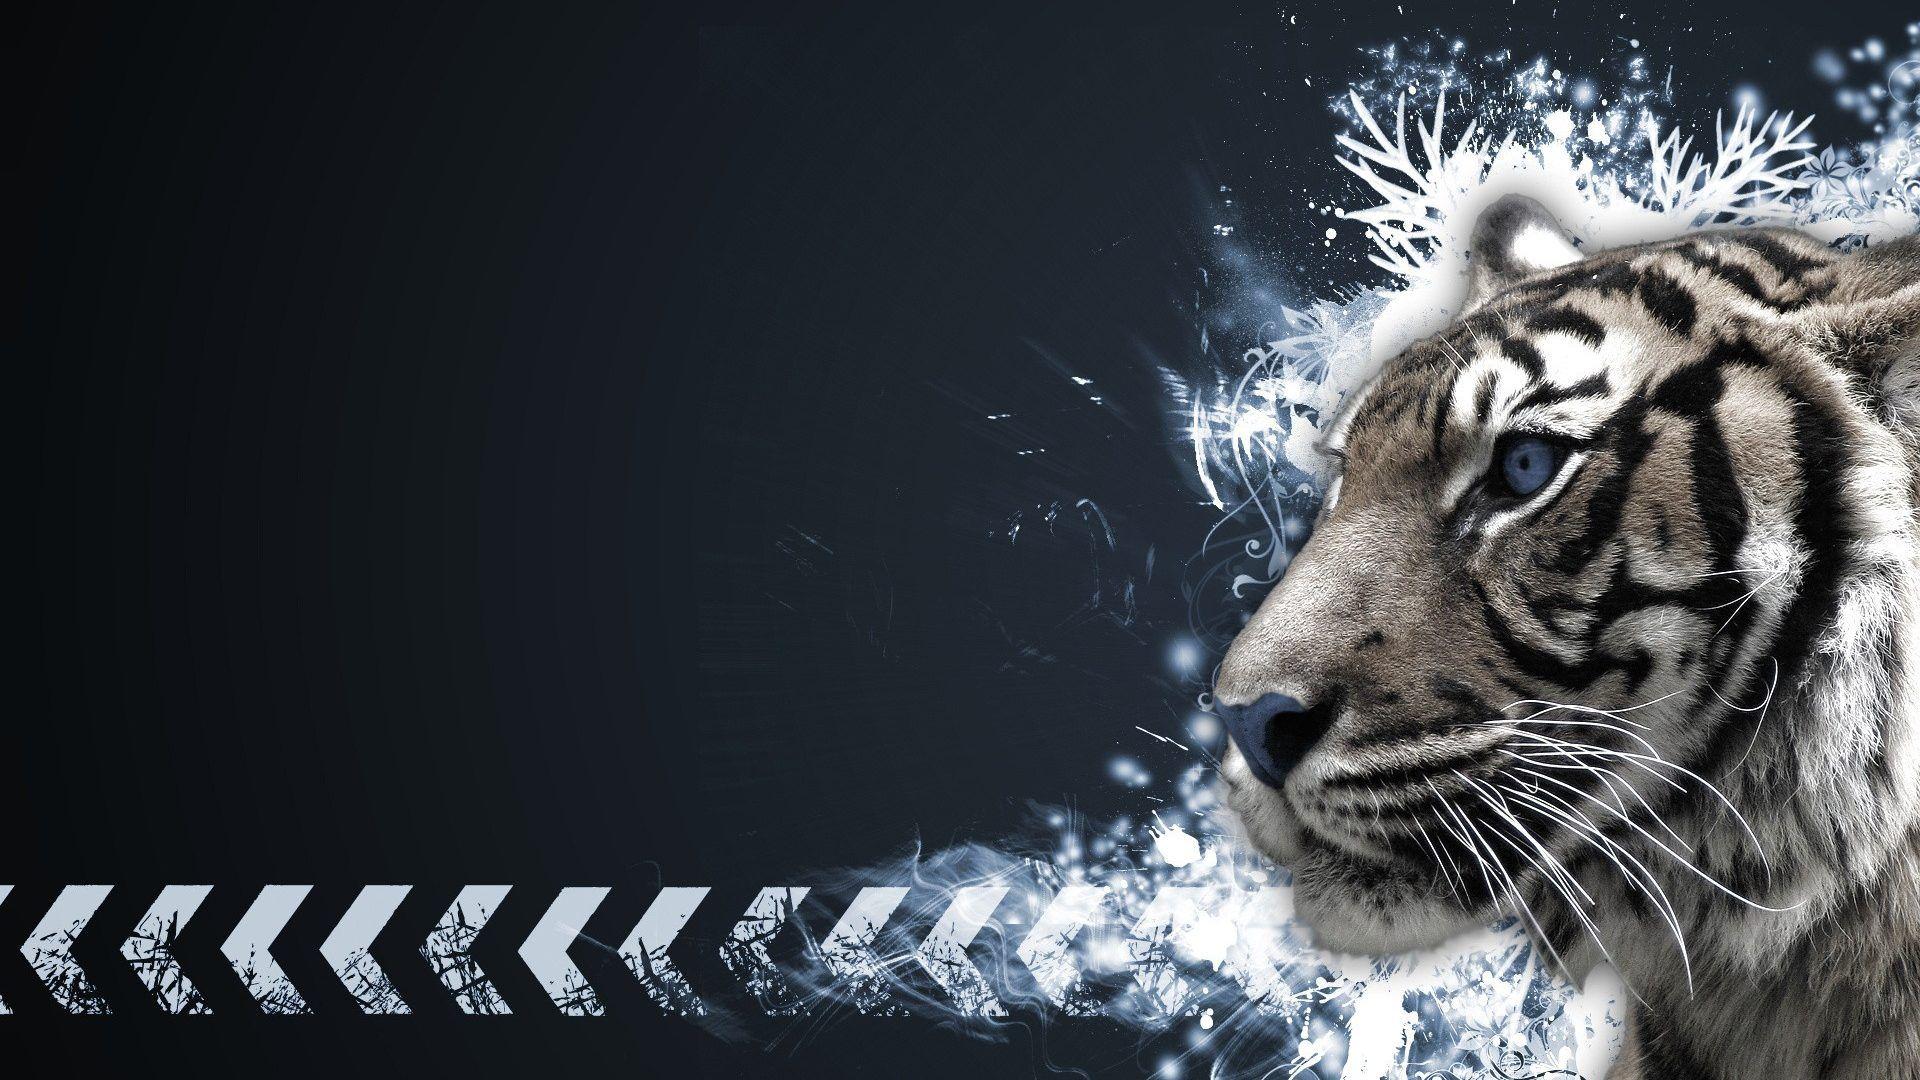 Tigers Tag wallpaper: Lions White Tigers Tiger Liger Cats